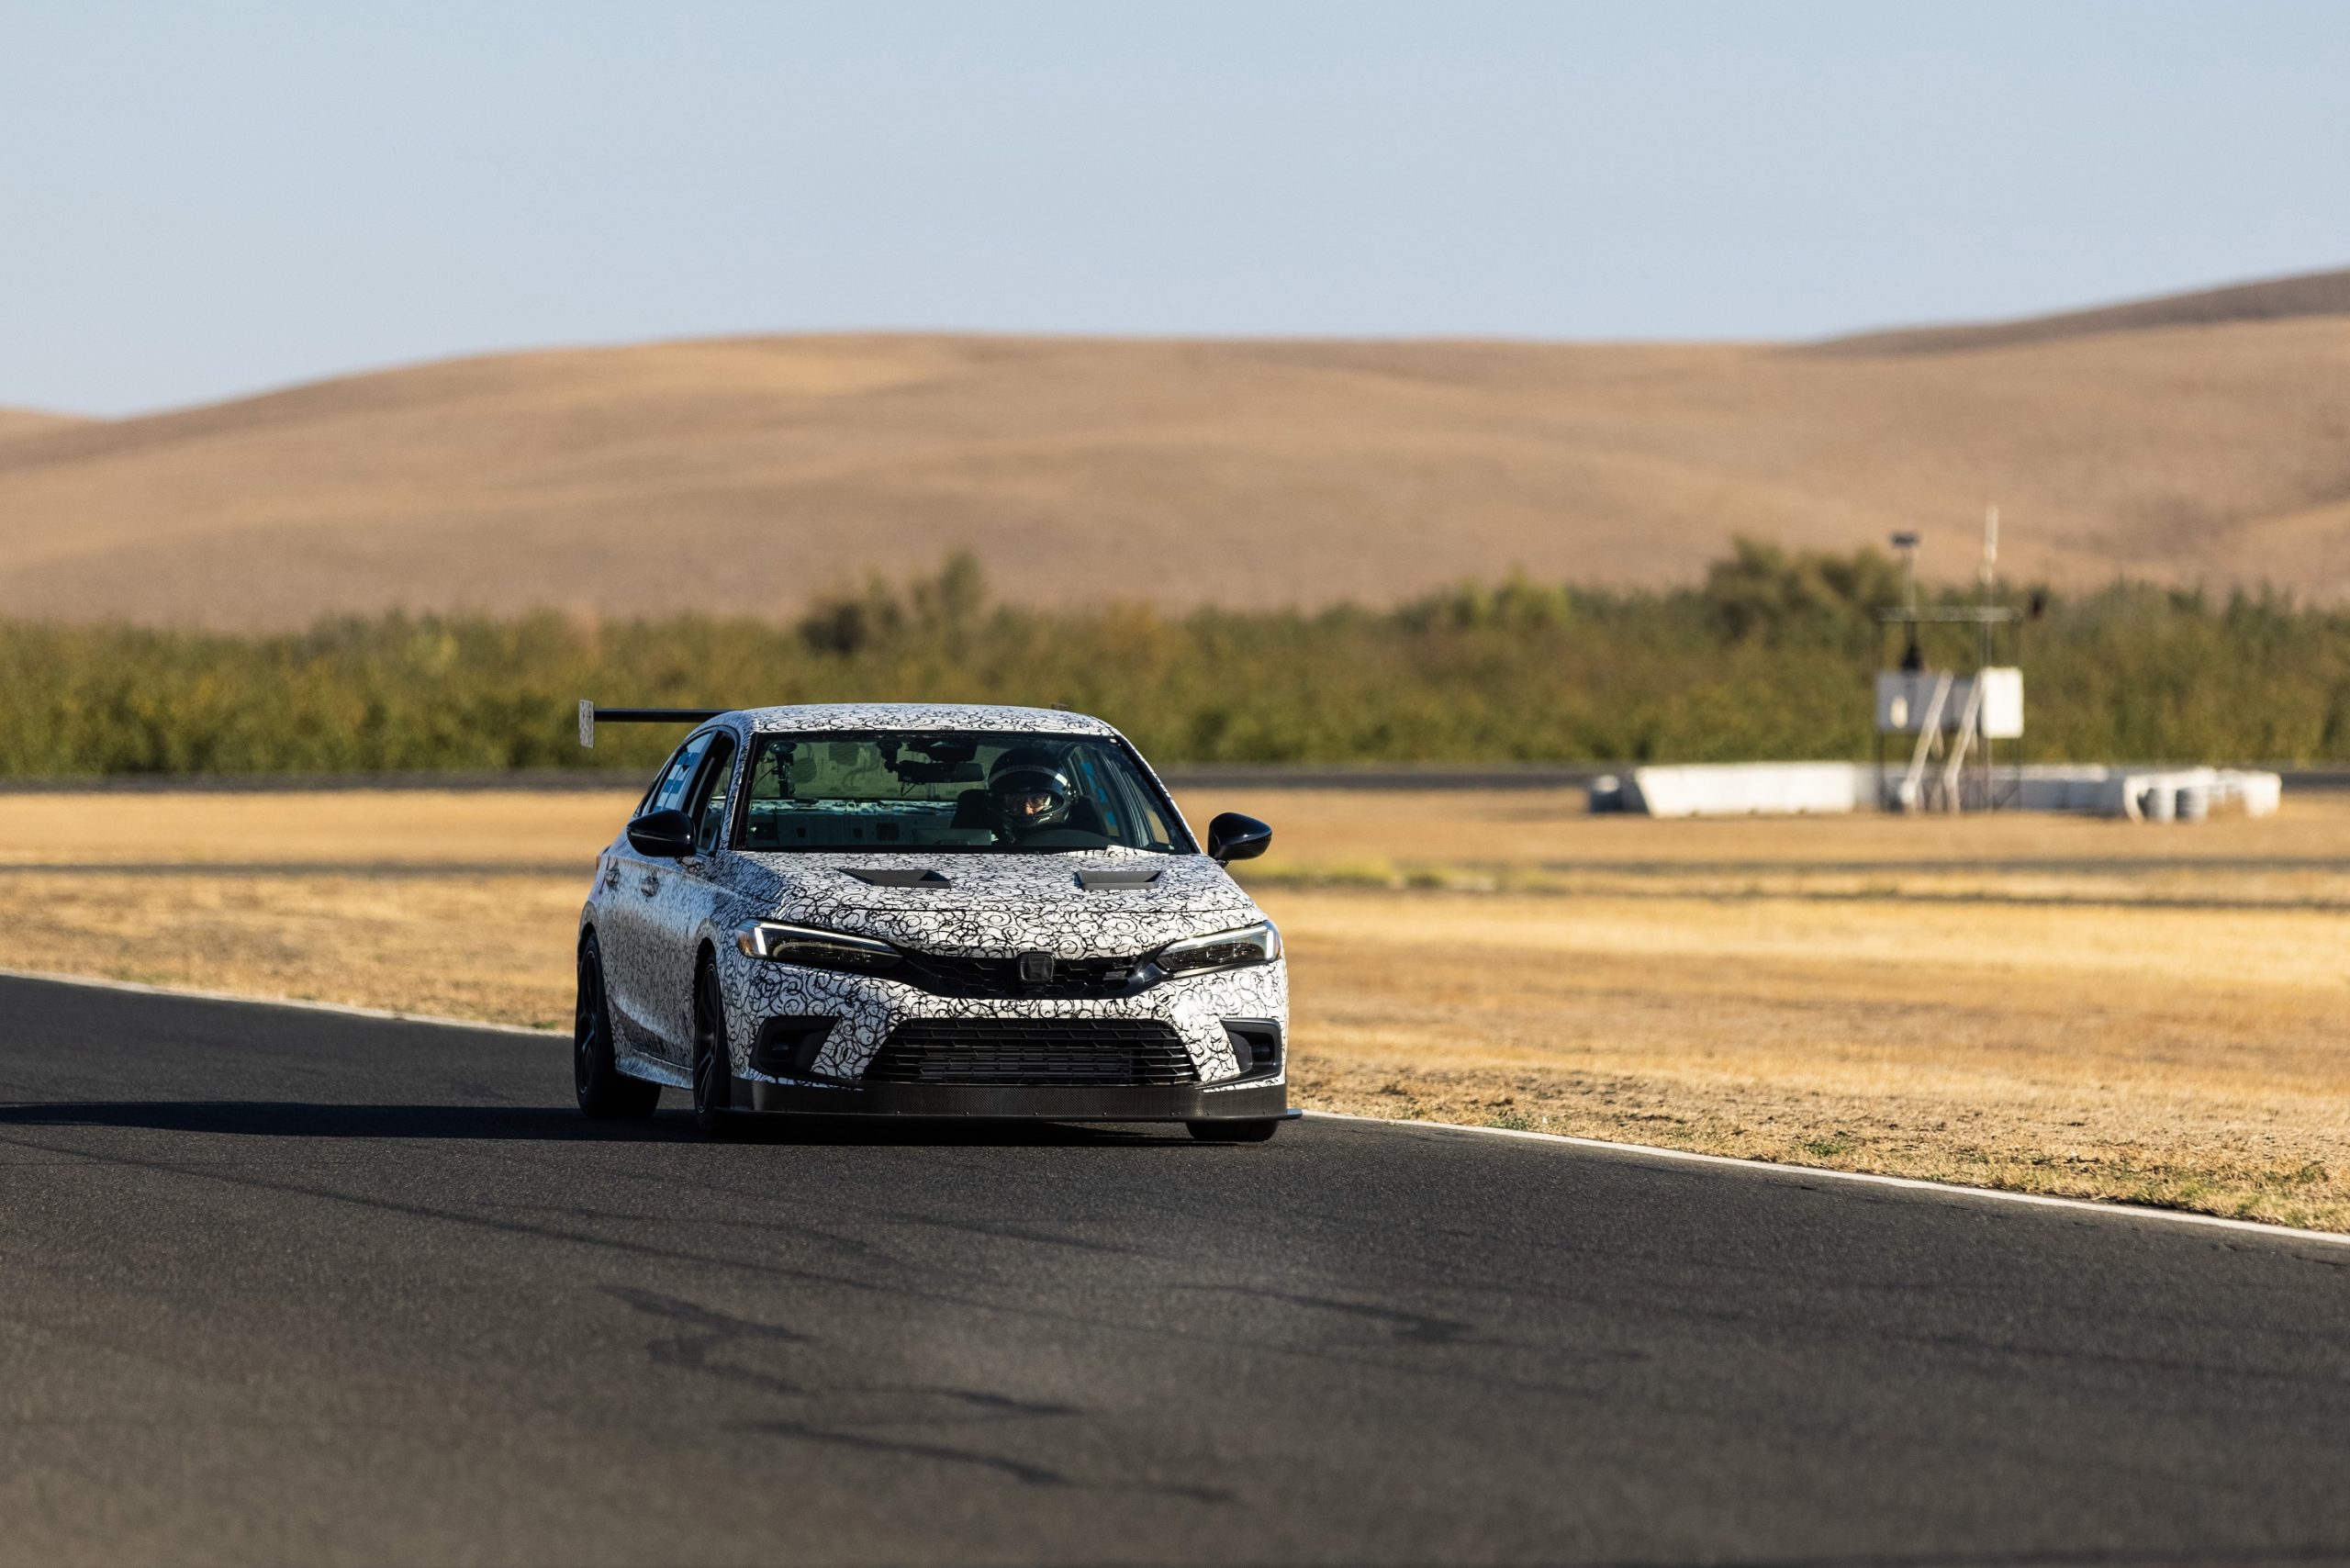 The camo-liveried 2022 Honda Civic Si during race testing shot from the front 3/4